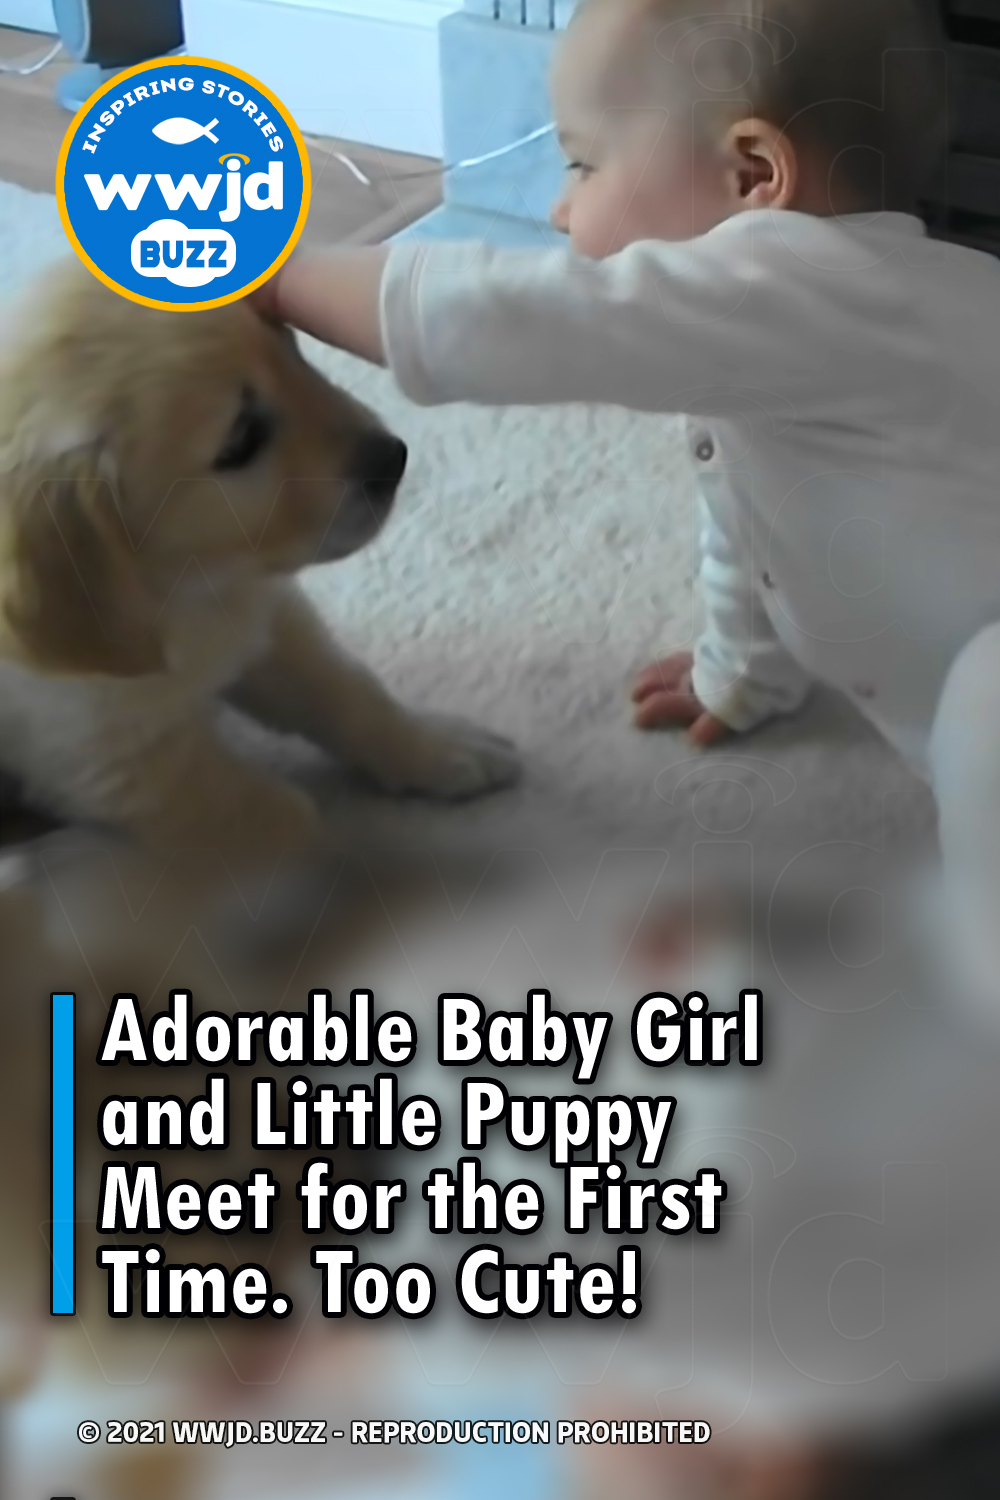 Adorable Baby Girl and Little Puppy Meet for the First Time. Too Cute!